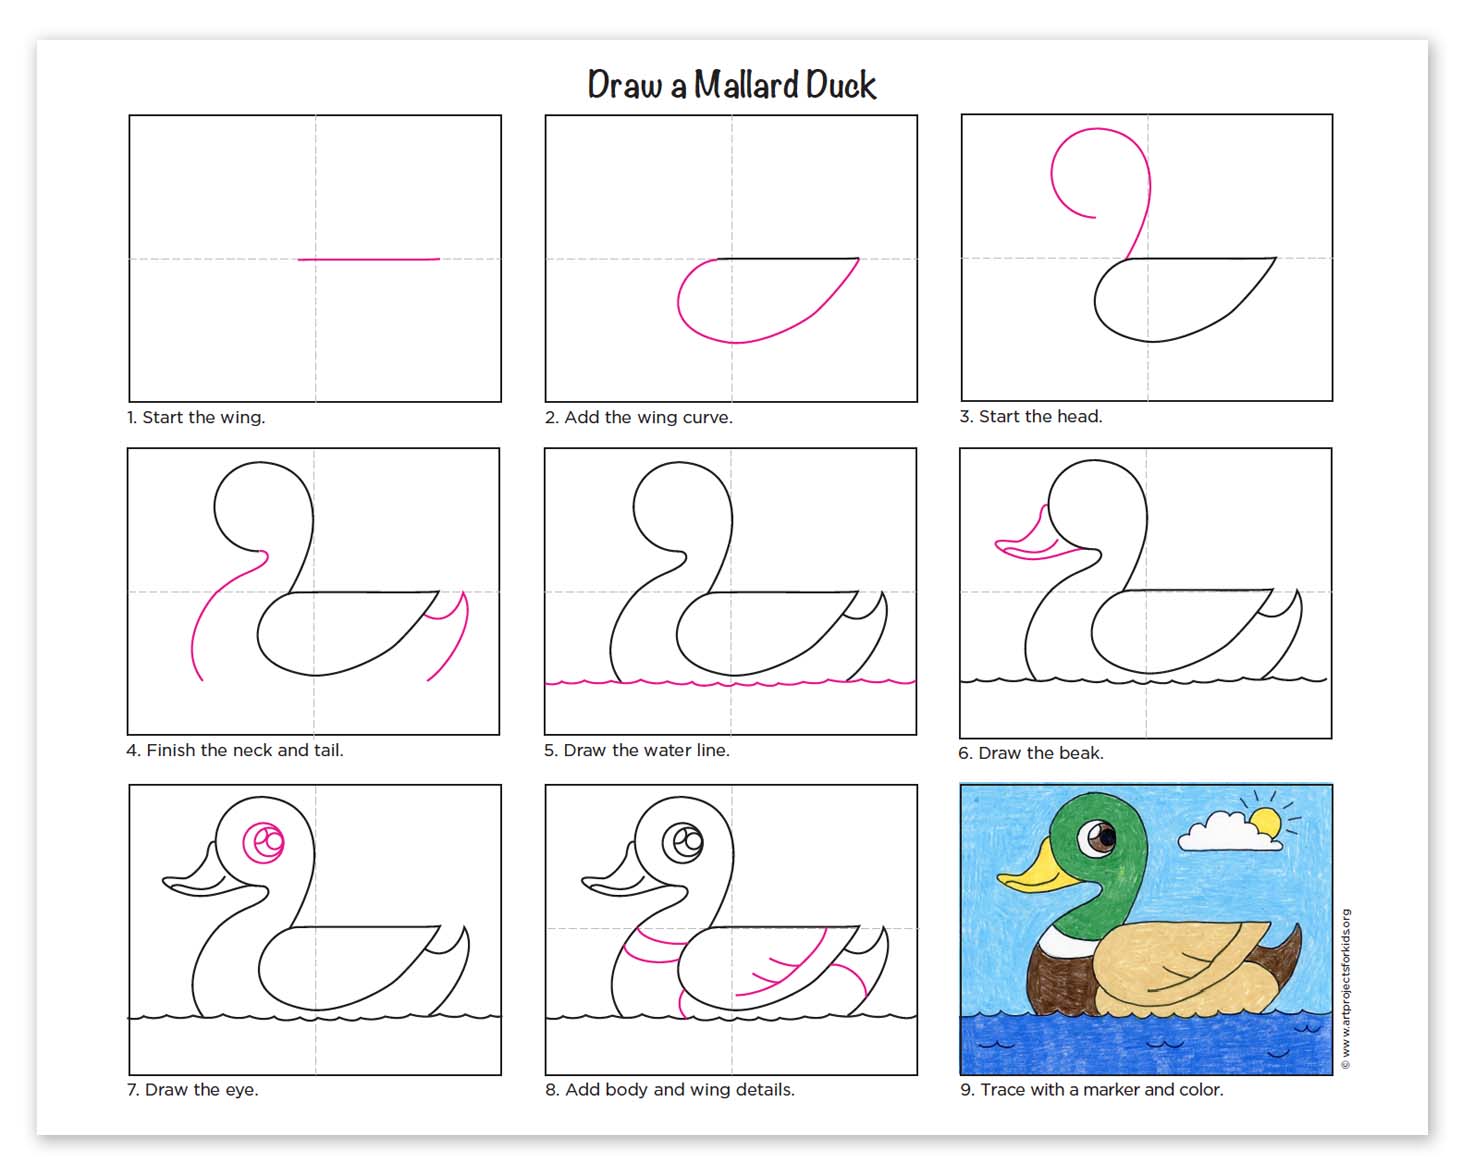 Top How To Draw A Duck Step By Step in the world Don t miss out 